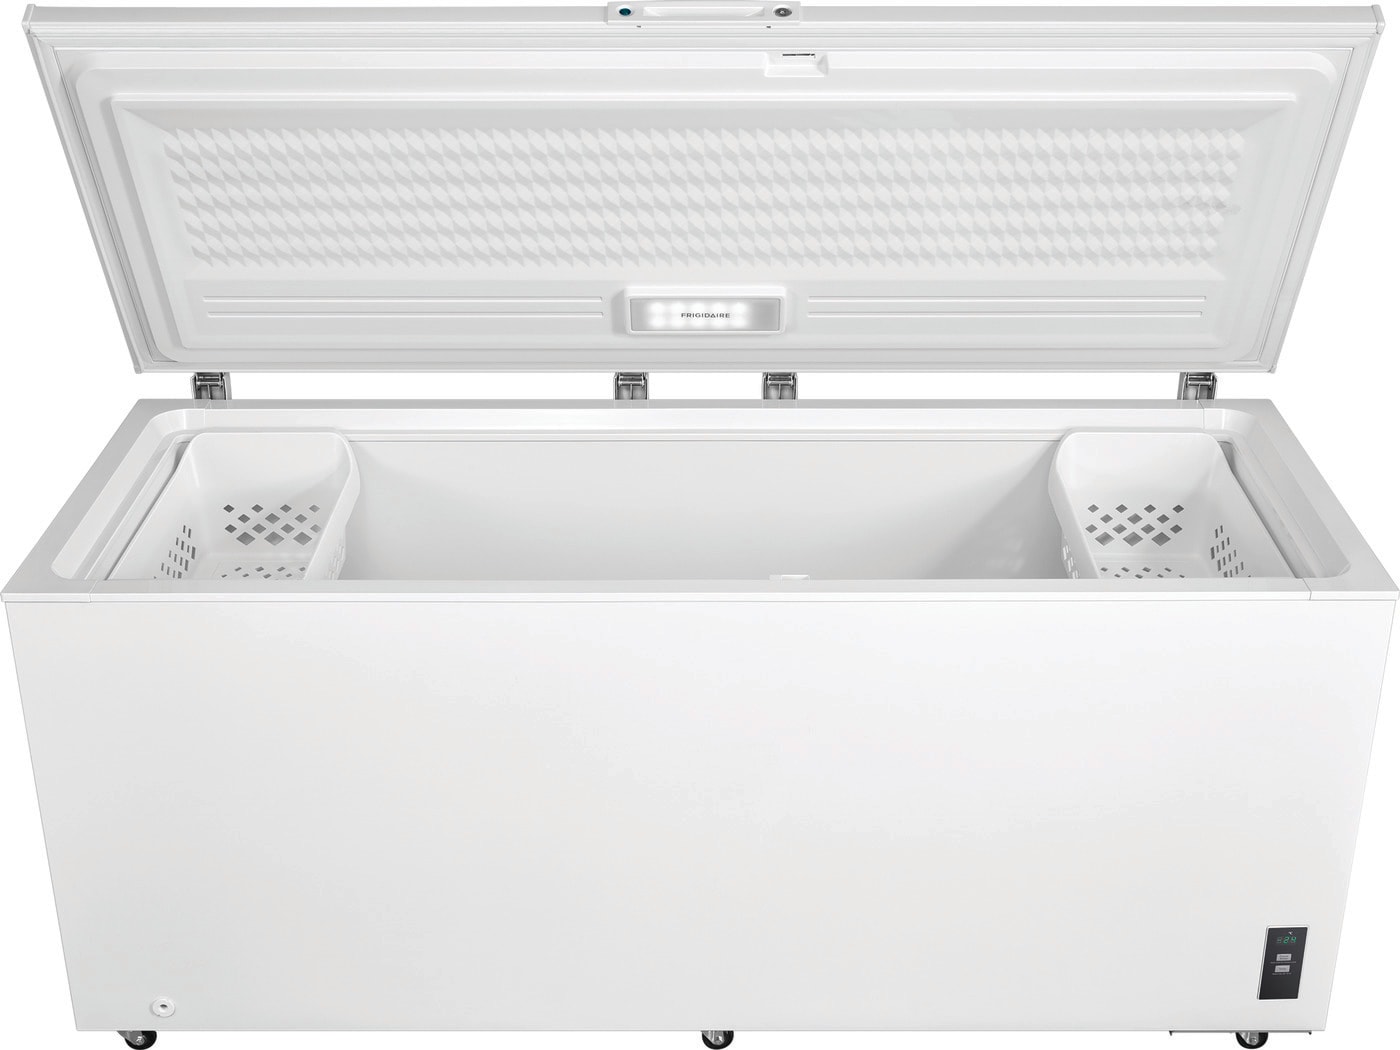 Haier LW120W 4.2 Cu. Ft. Access Plus Chest Freezer with Manual